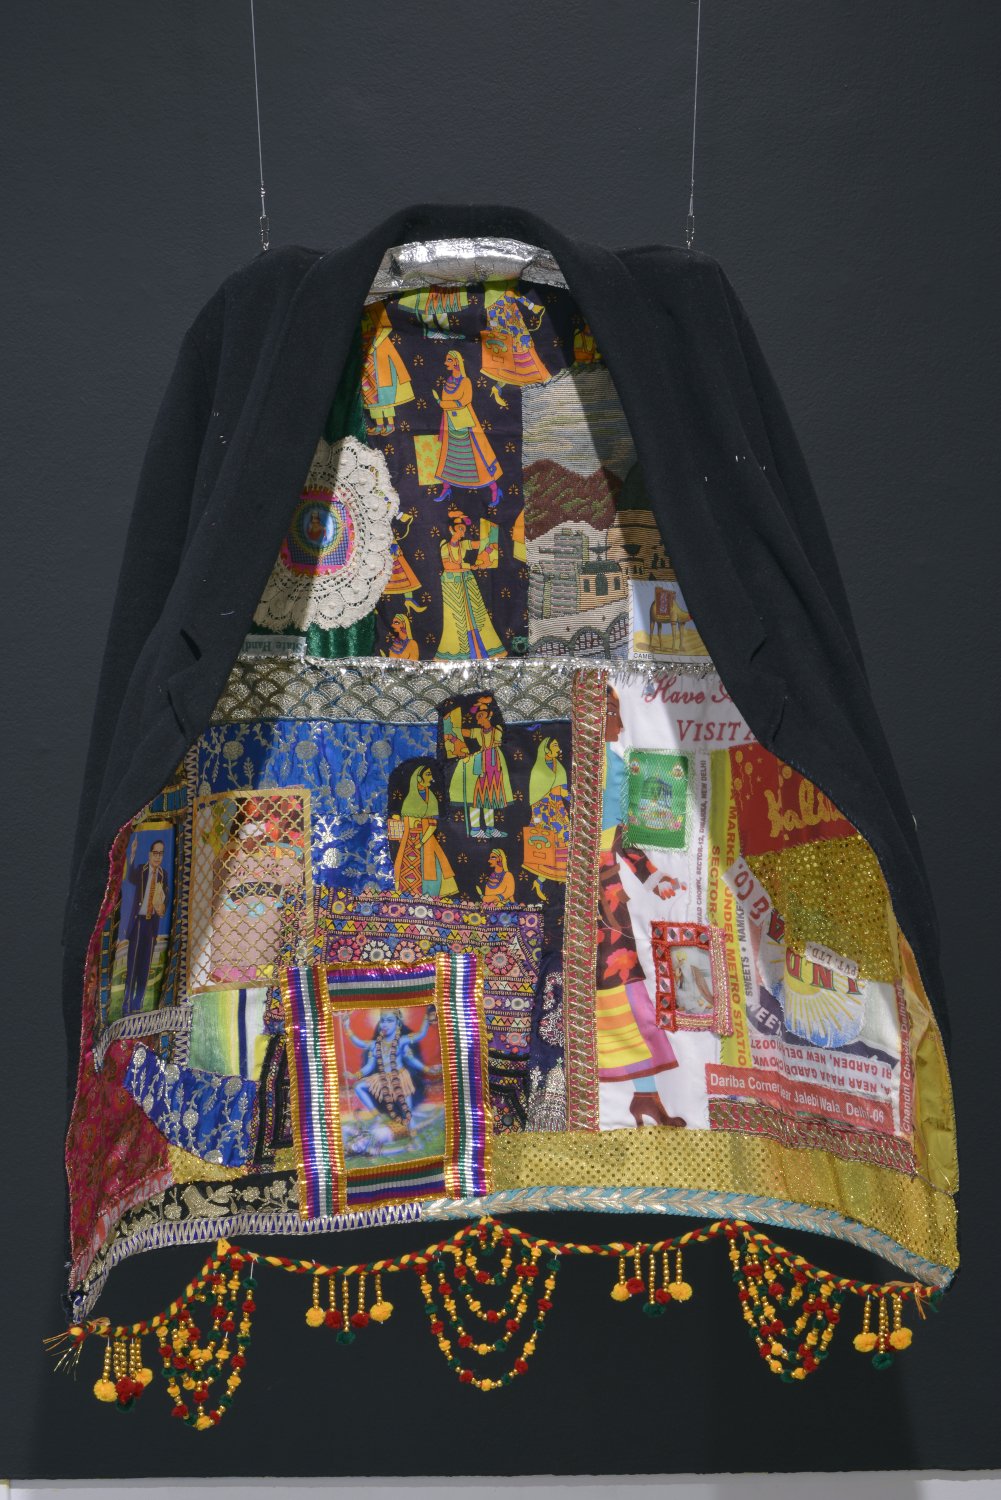  Meera Sethi,  Visit Again, (Outerwhere Series) , 2022, mixed media on found coat. Collection of the Artist  